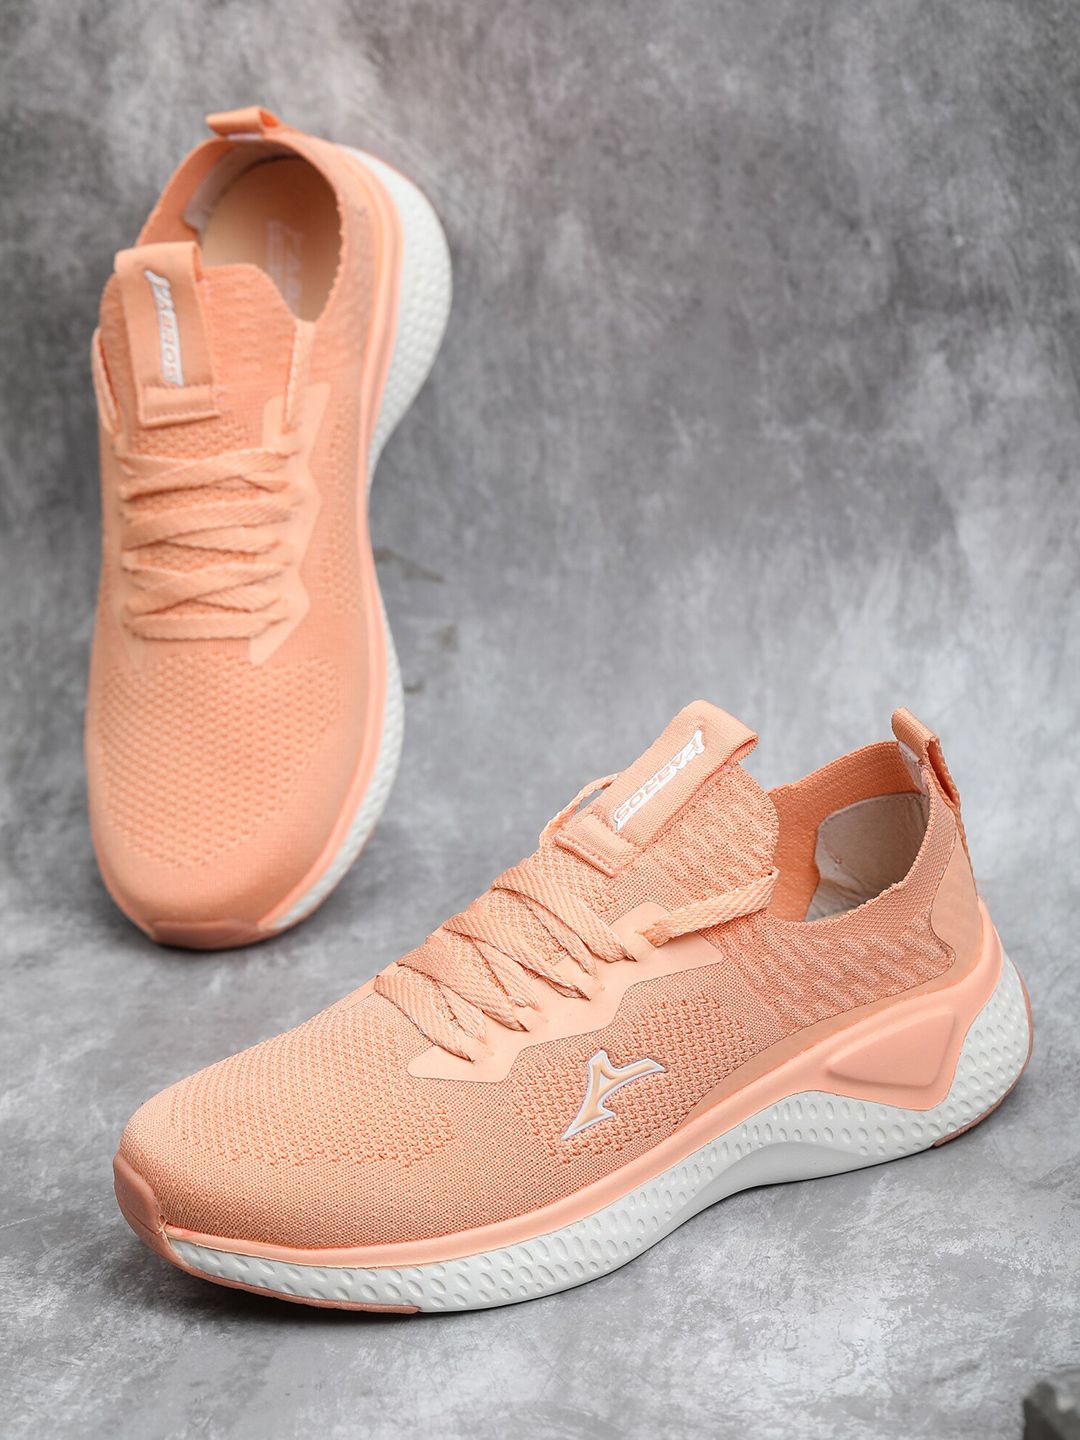 ABROS Women Peach-Coloured Mesh Running Shoes Price in India